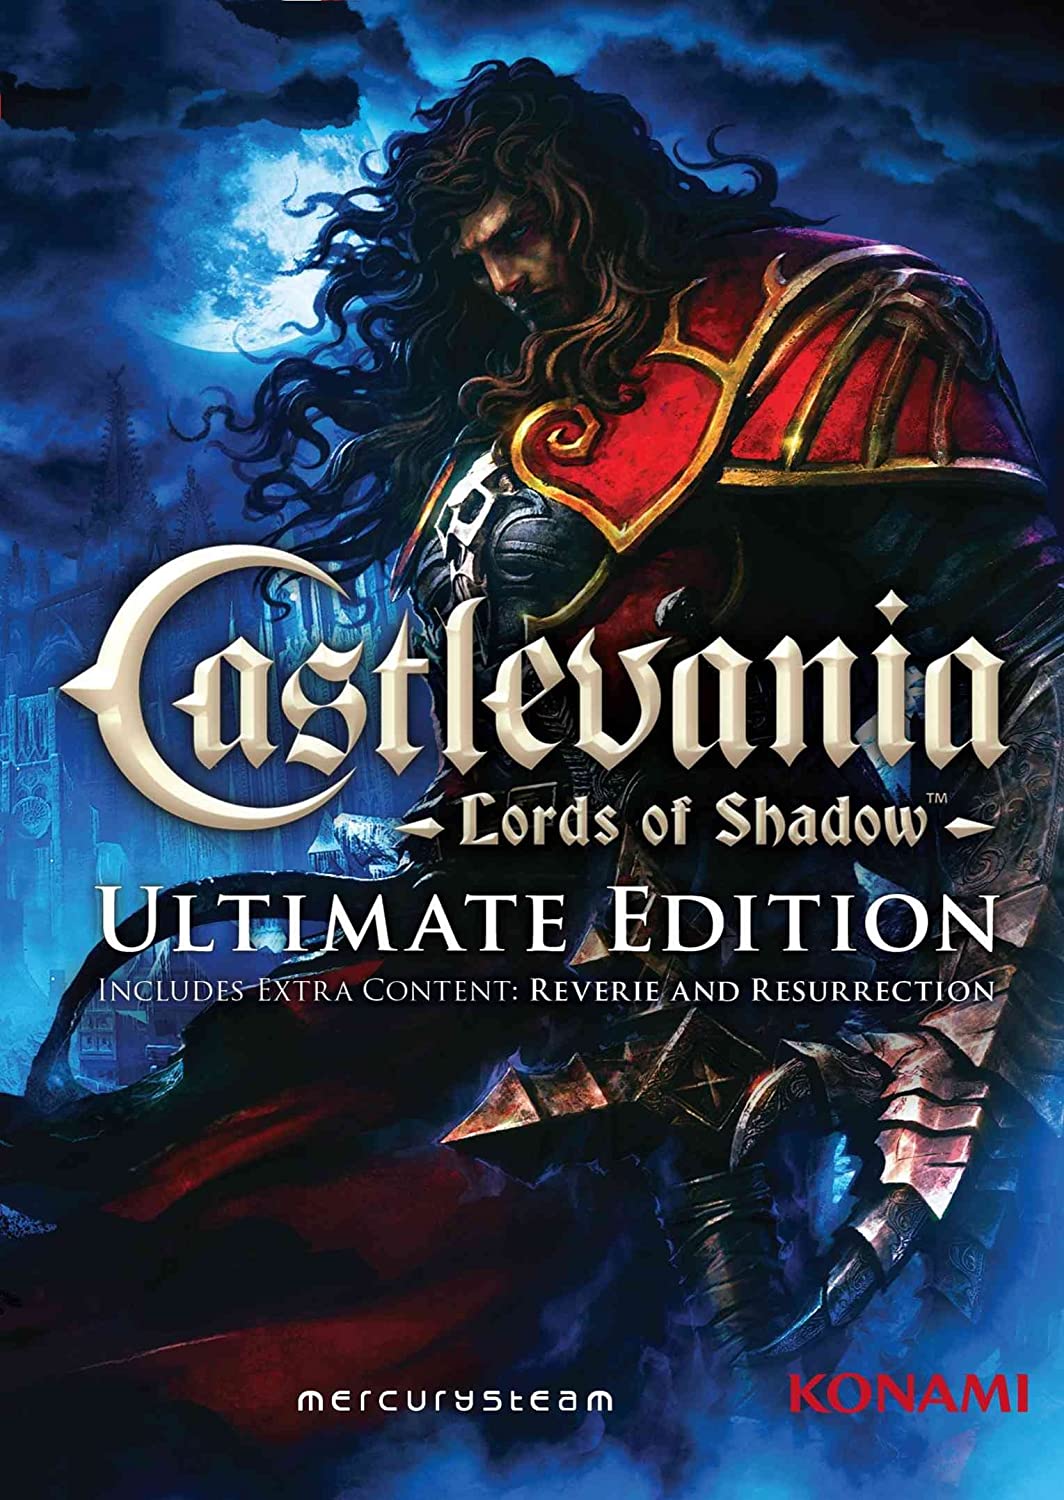 Castlevania: Lords of Shadow — Ultimate Edition